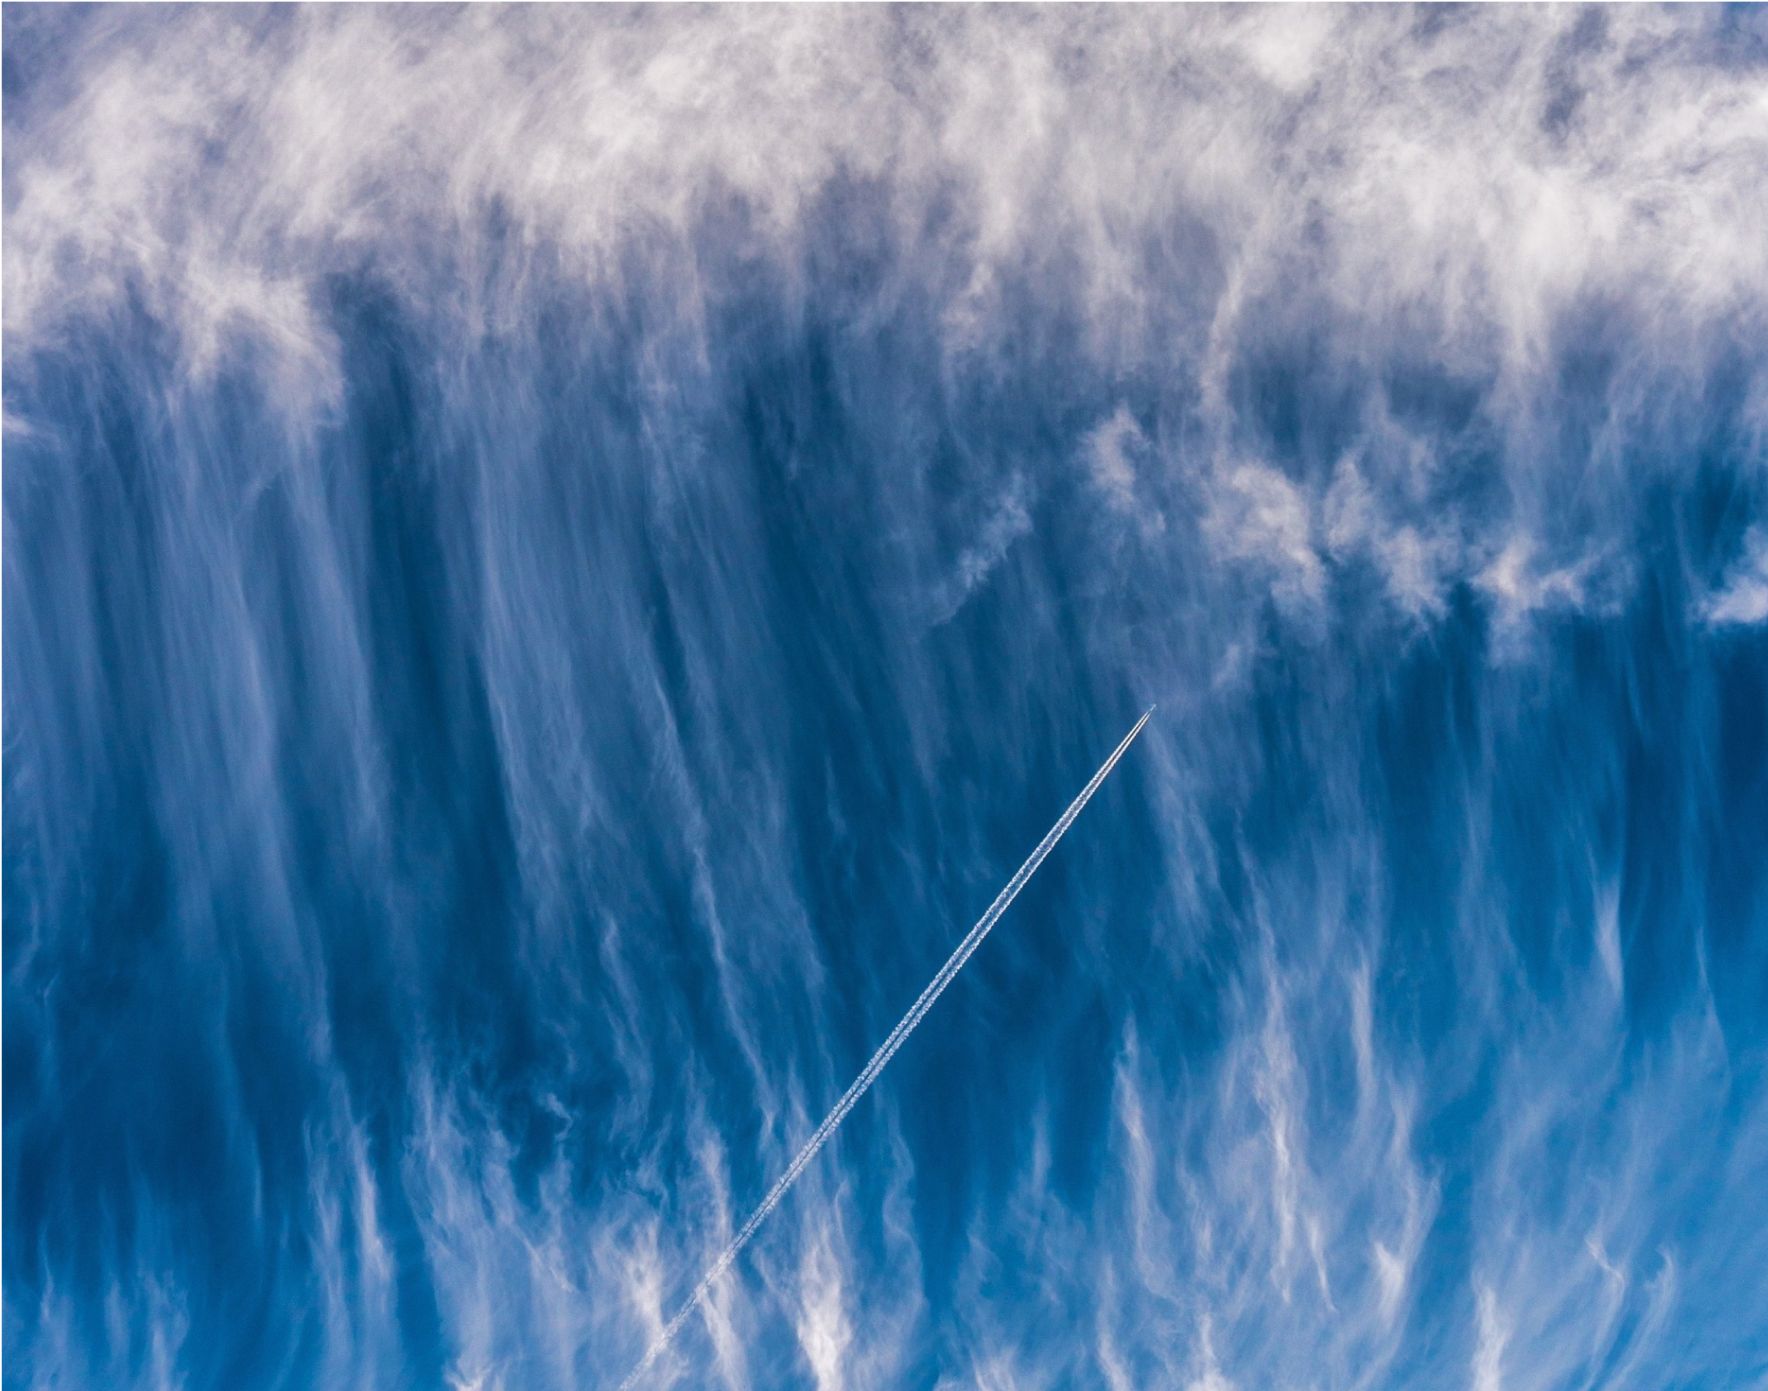 A plane's distinct contrail is visible as it flies into dramatic blue clouds